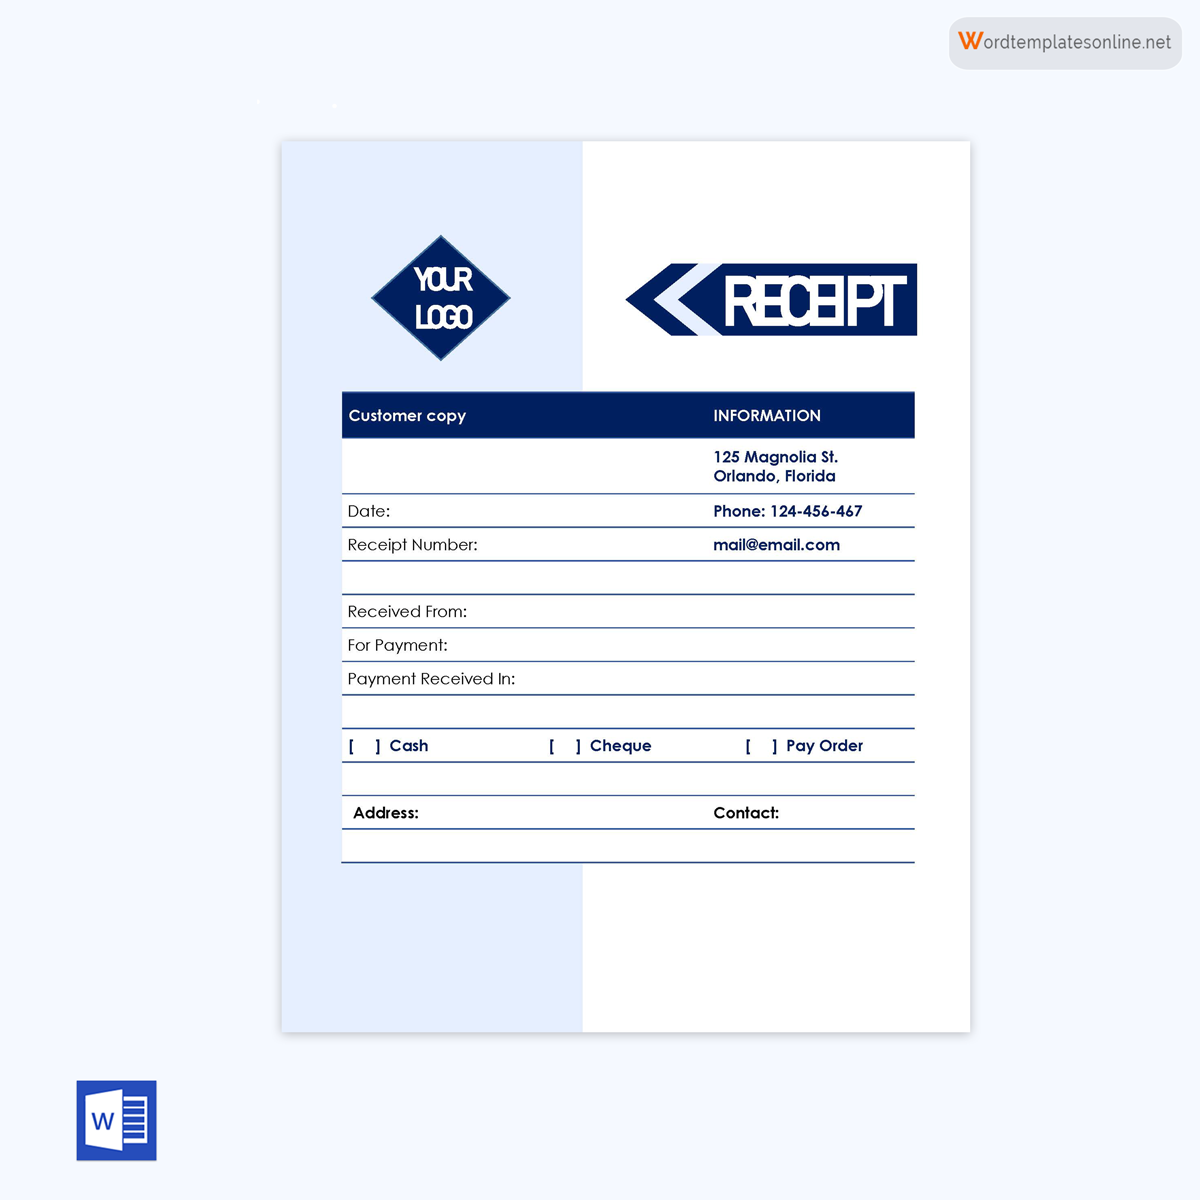 Taxi receipt templates for download - free